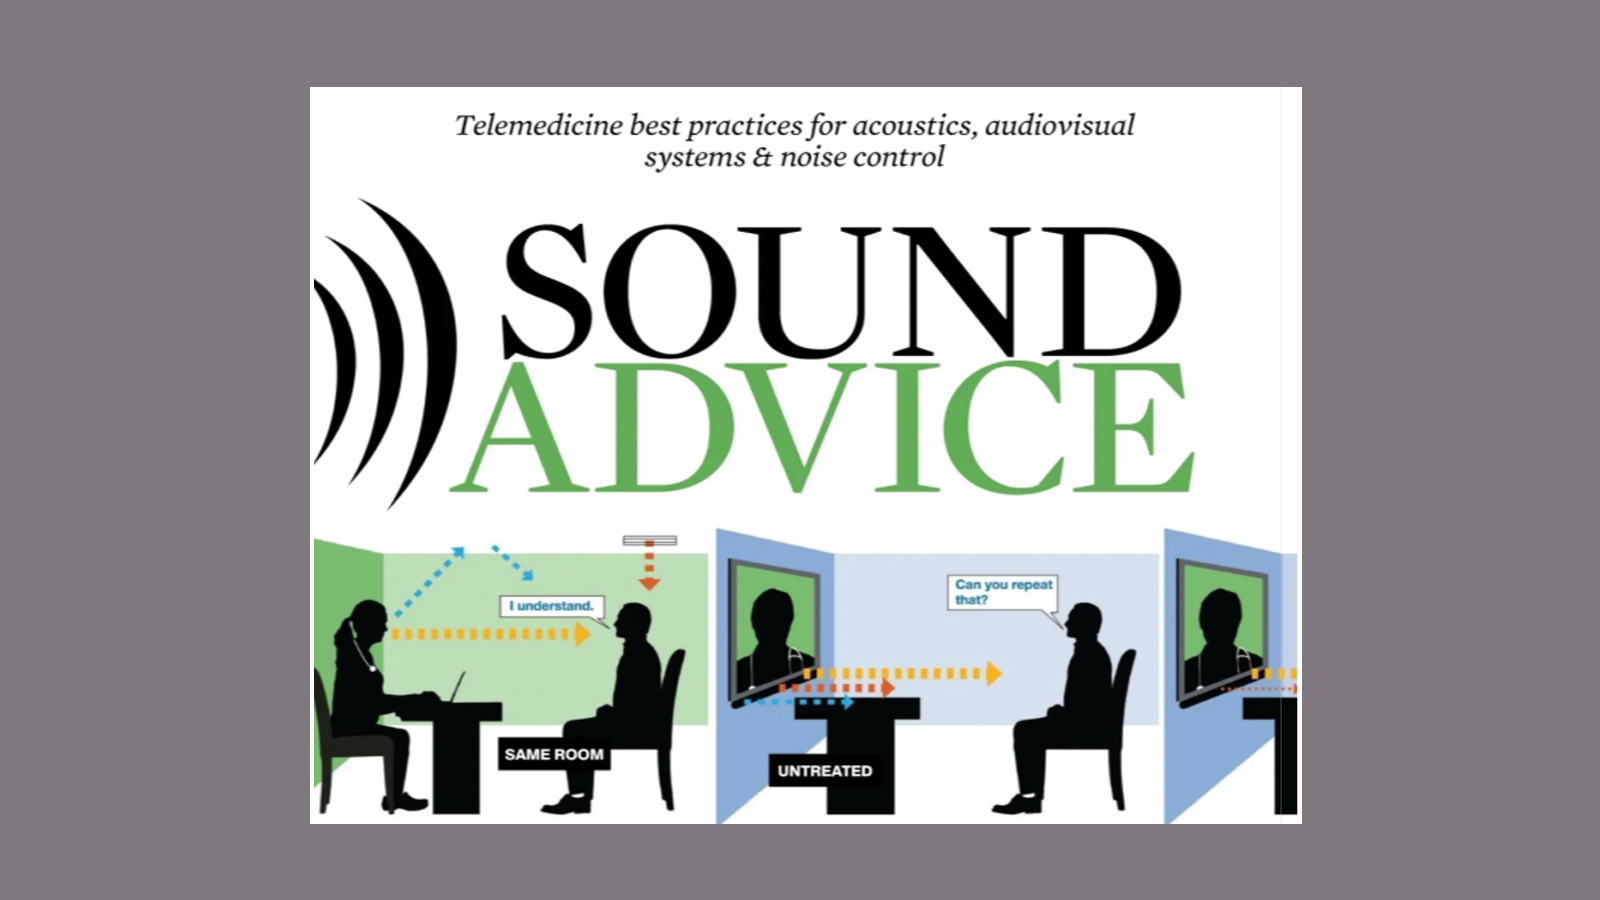 Sound Advice: Telemedicine Best Practices for Acoustics, Audiovisual Systems & Noise Control